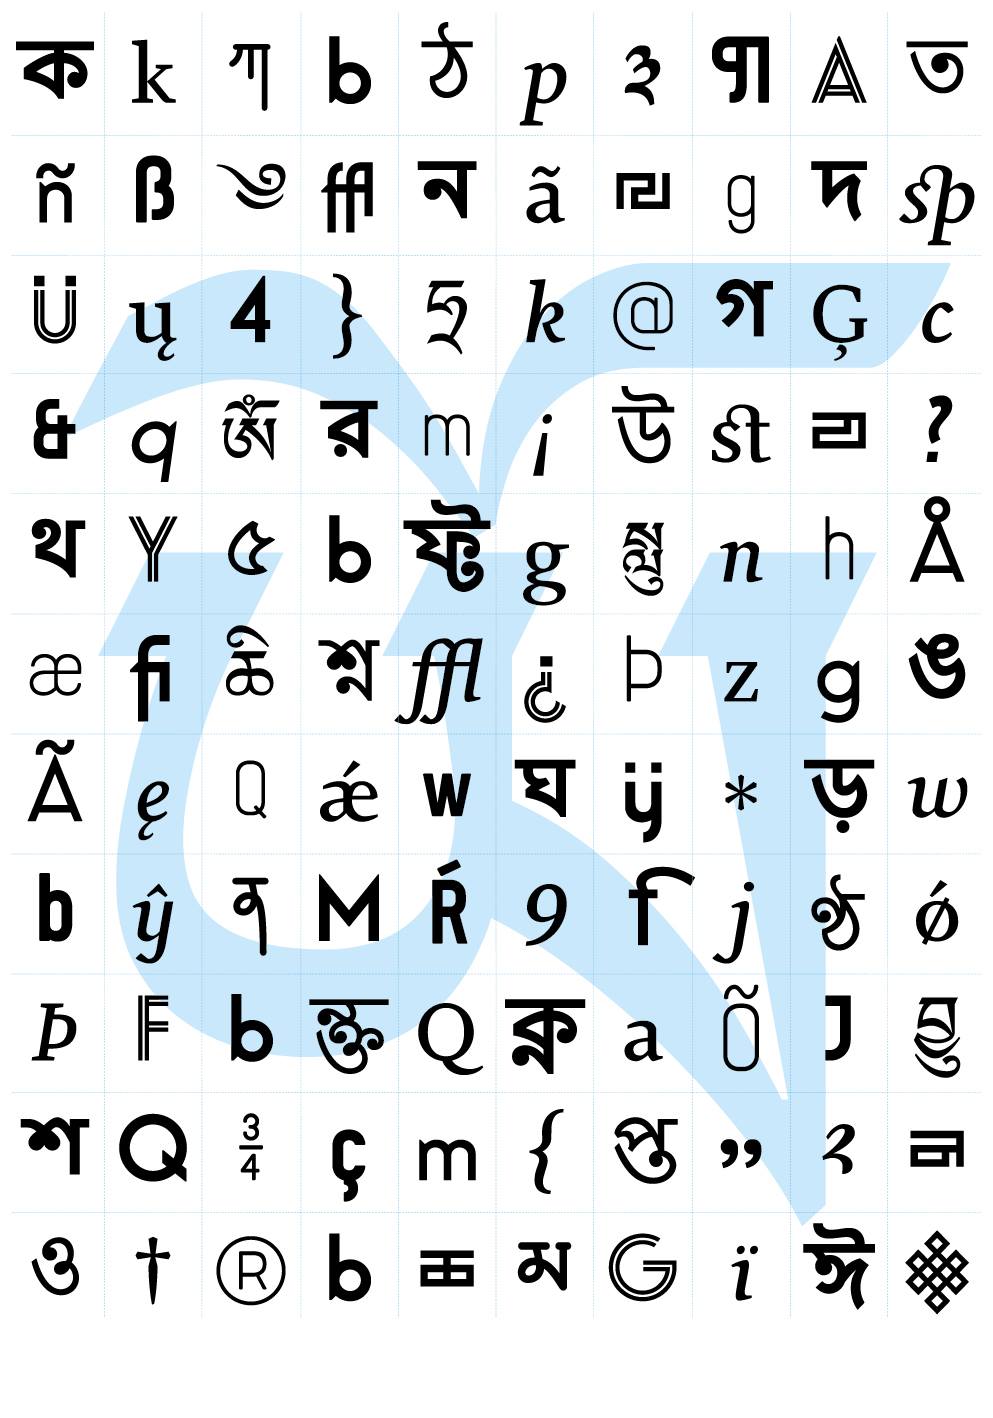 From sound to glyph: the typographic representation of languages